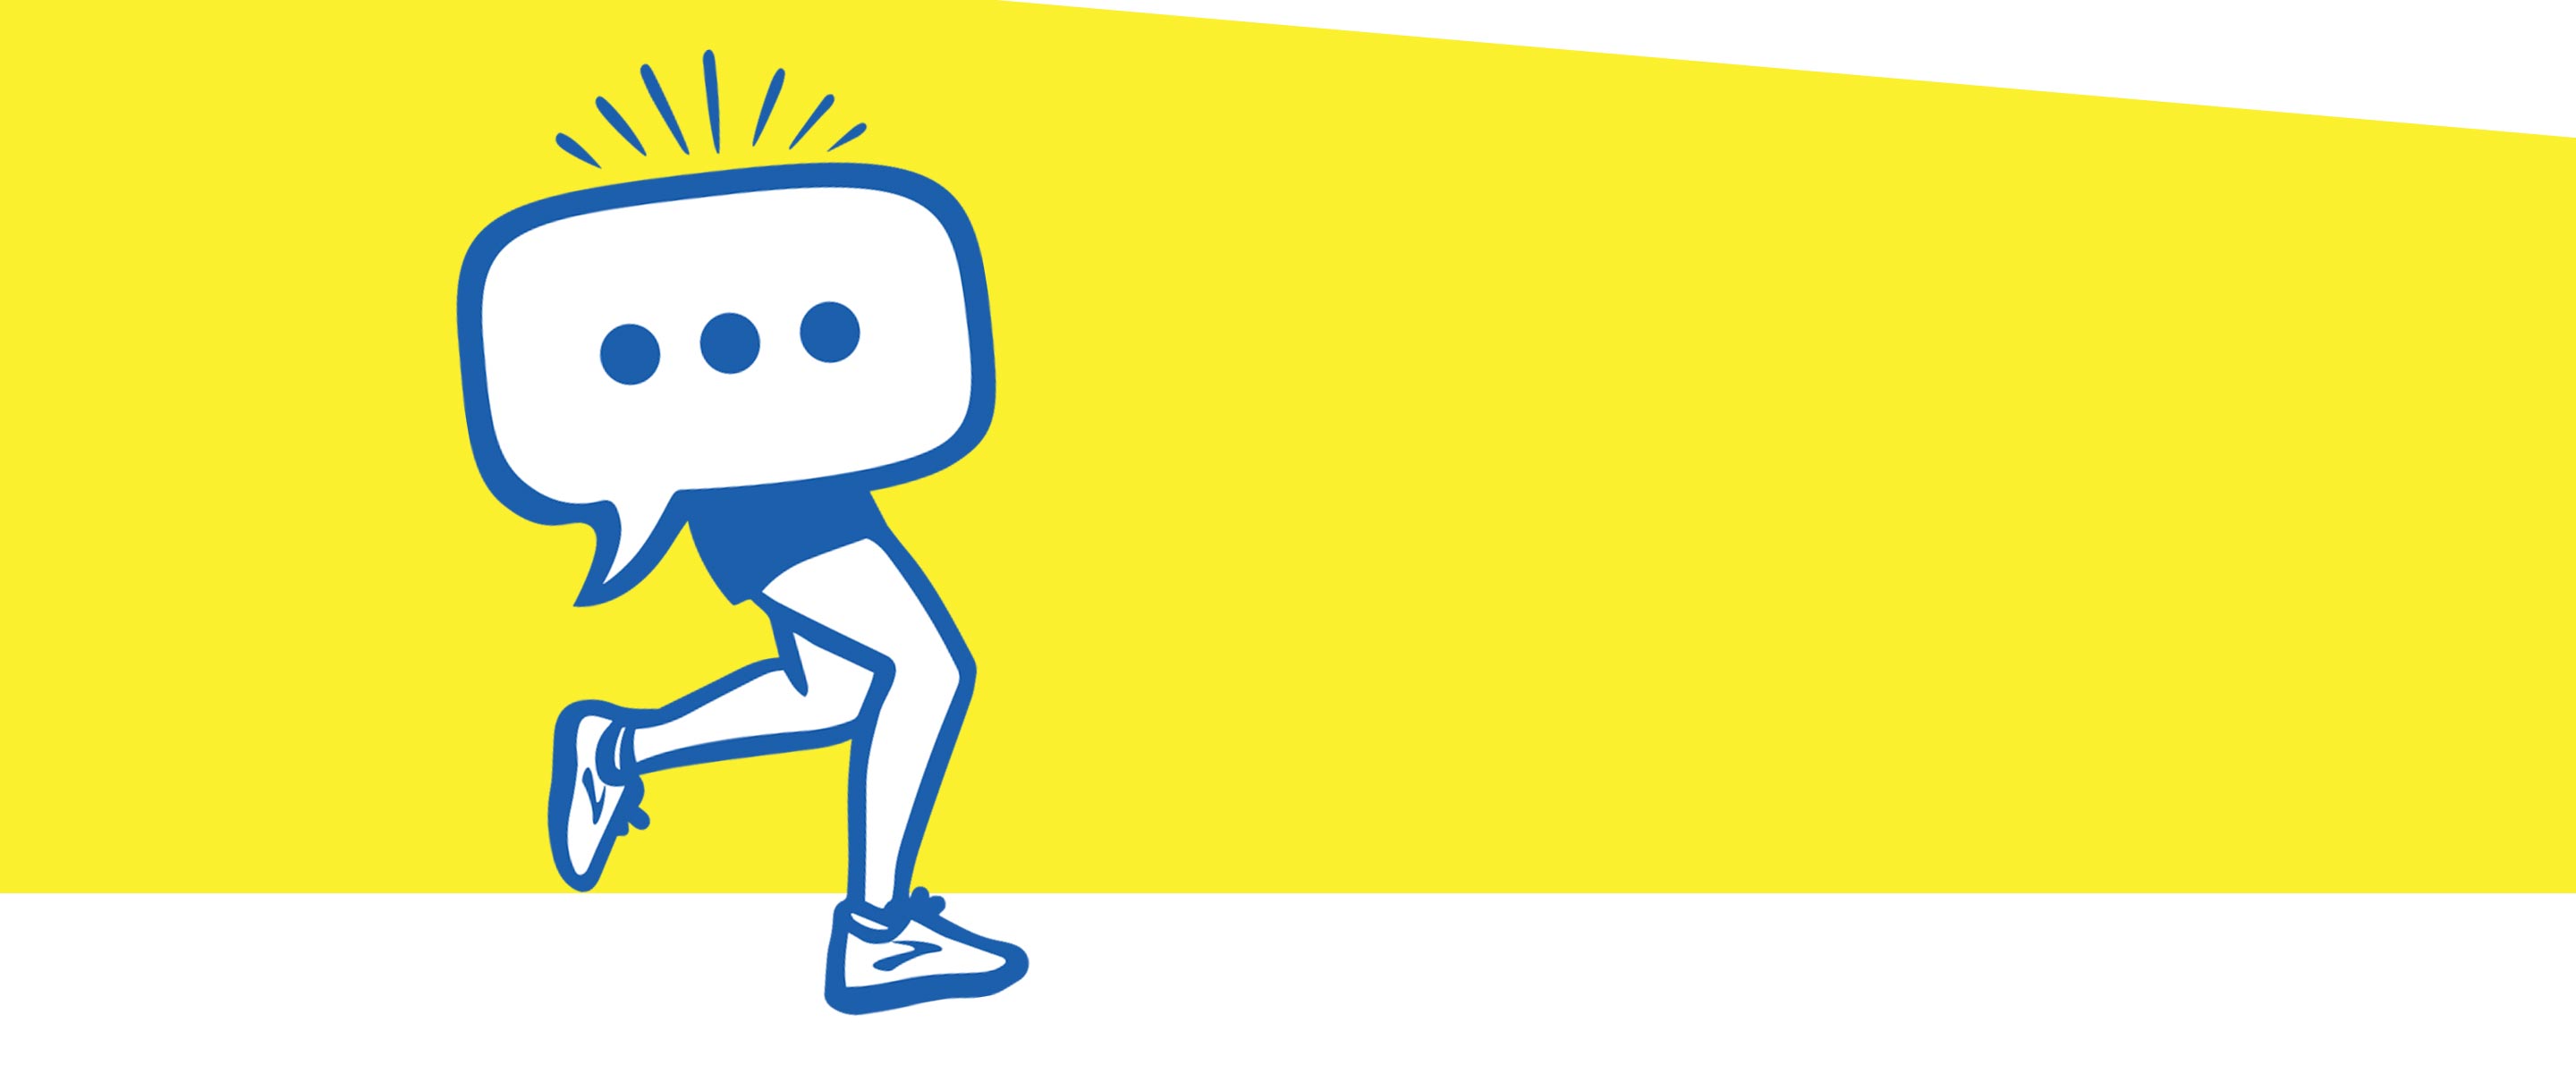 Text typing icon with legs and Brooks shoes running. 